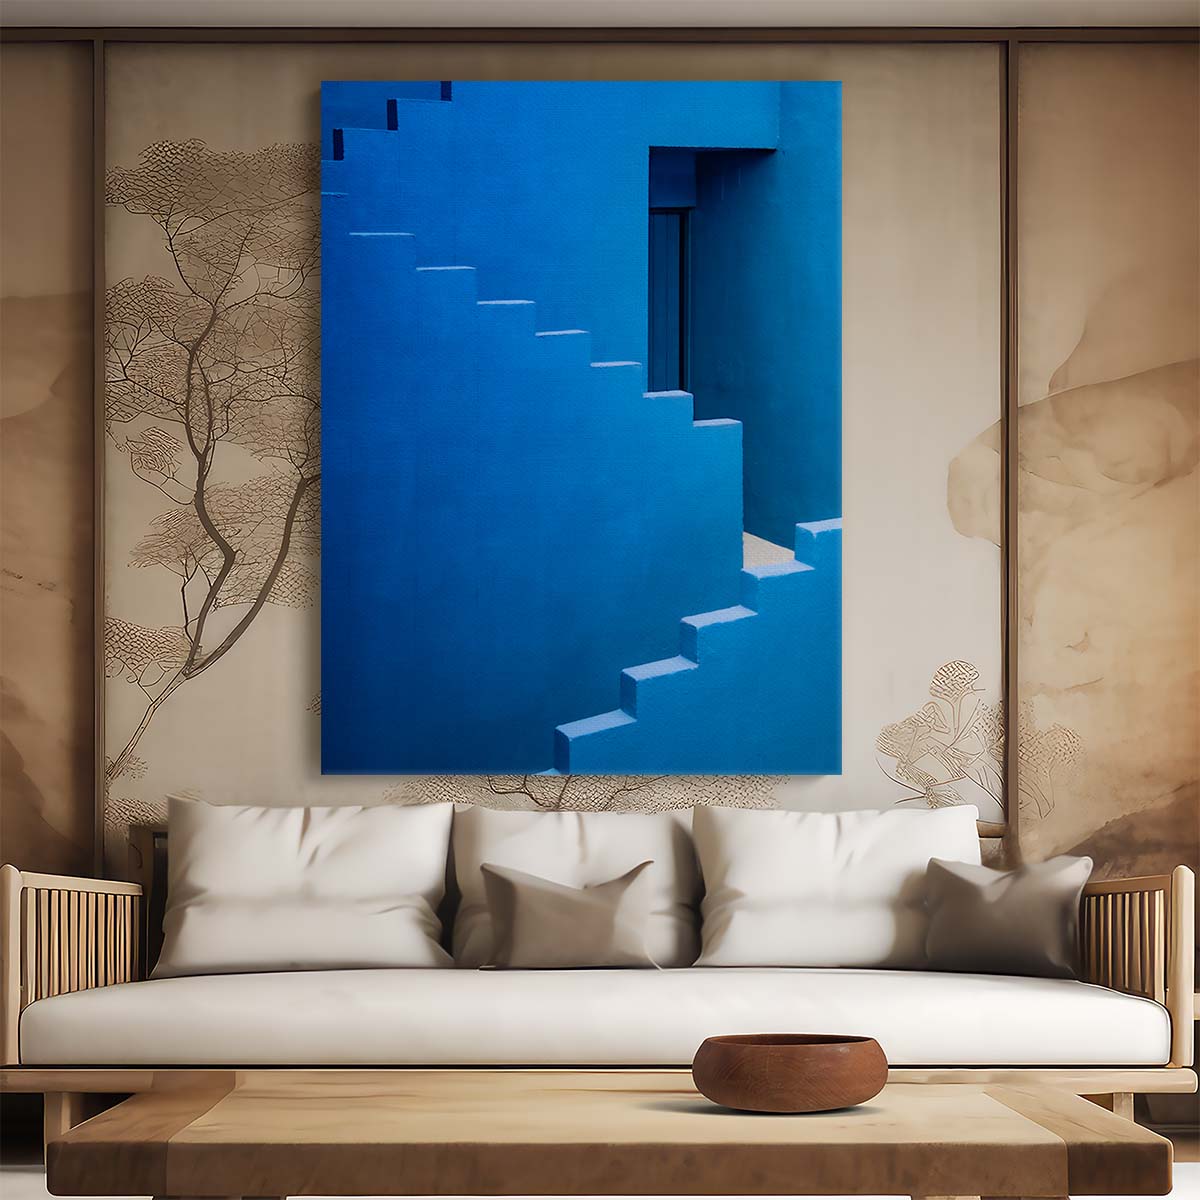 Colorful Abstract Bofill Staircase Photography Wall Art by Luxuriance Designs, made in USA